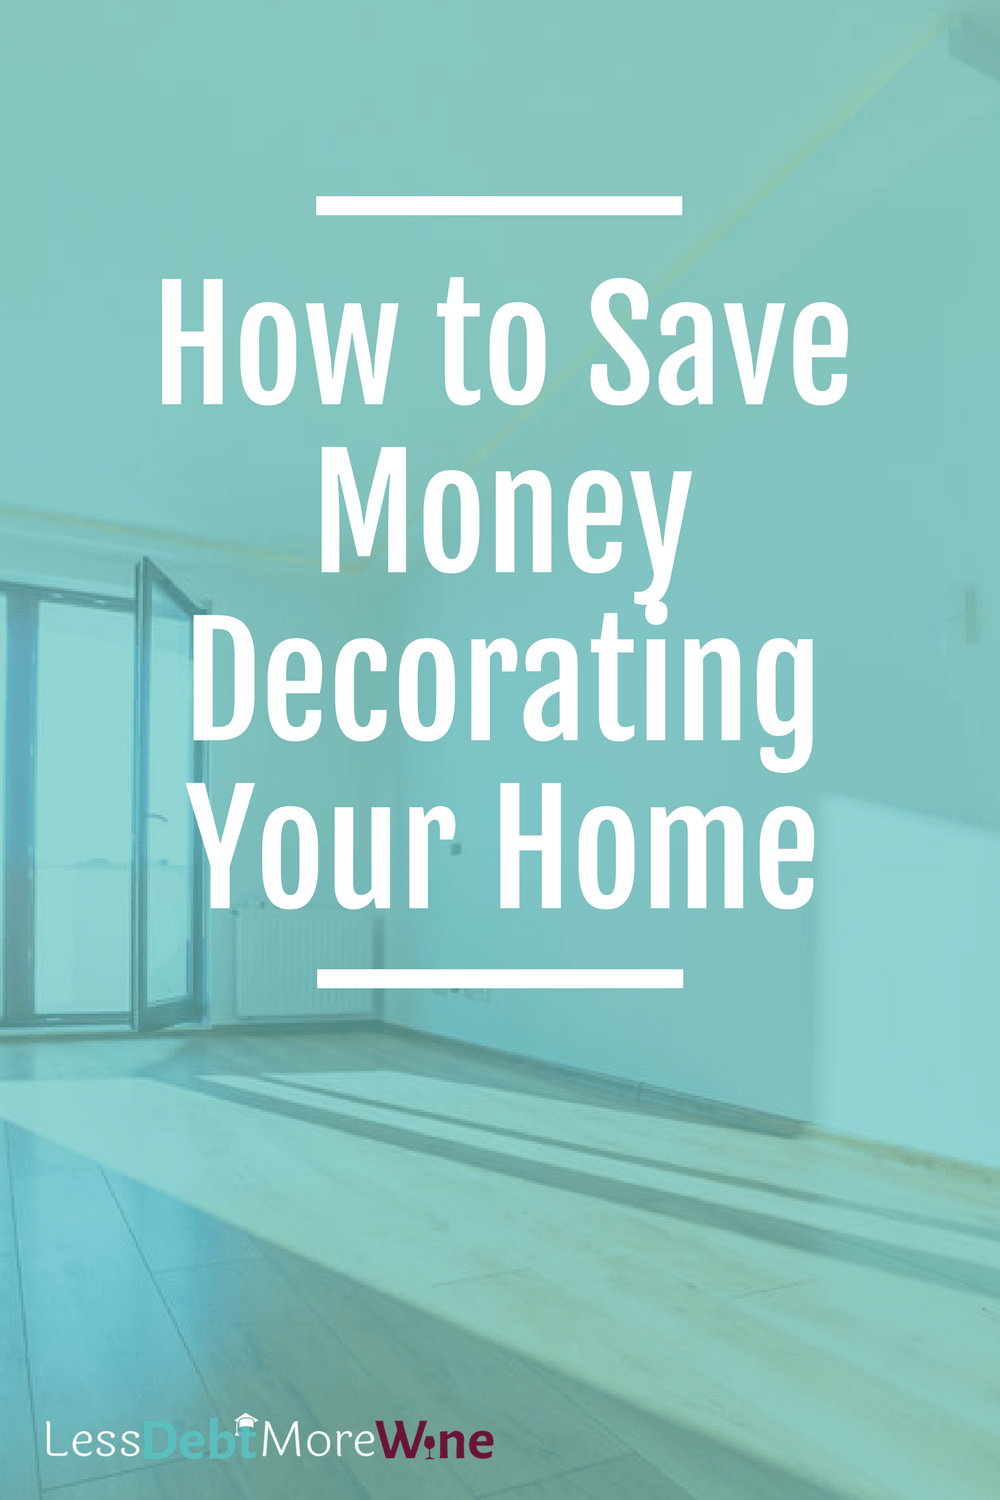 How to save money decorating your home | DIY | home deco | decorating your home on a budget